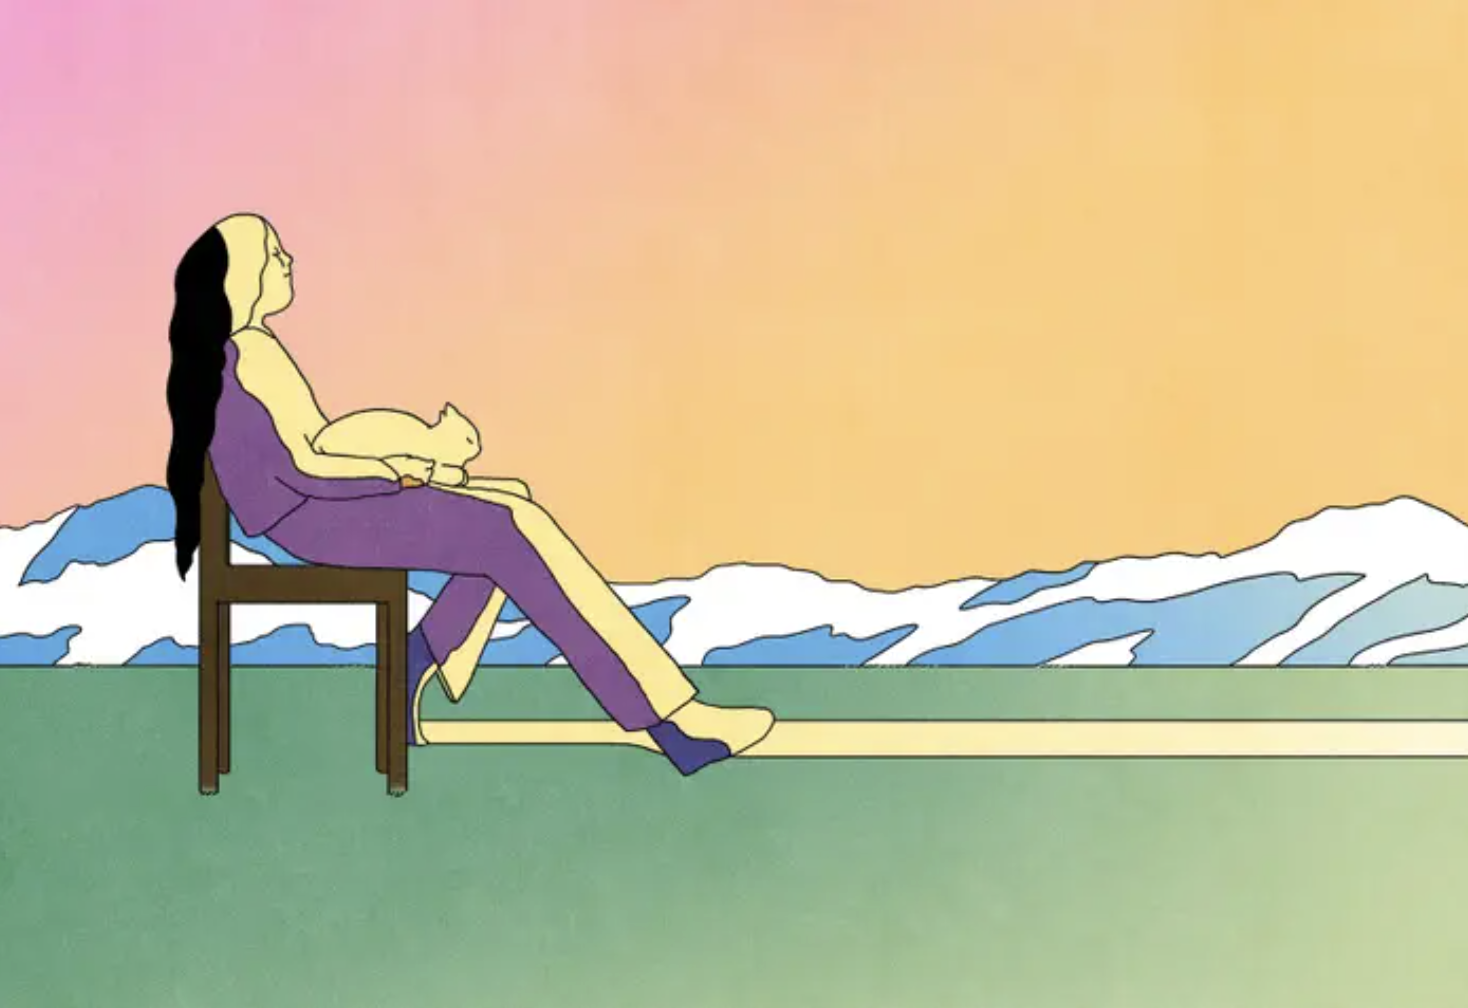 illustration, someone with long hair and a cat on their lap sits on a chair looking off towards a sunrise, mountains in the background